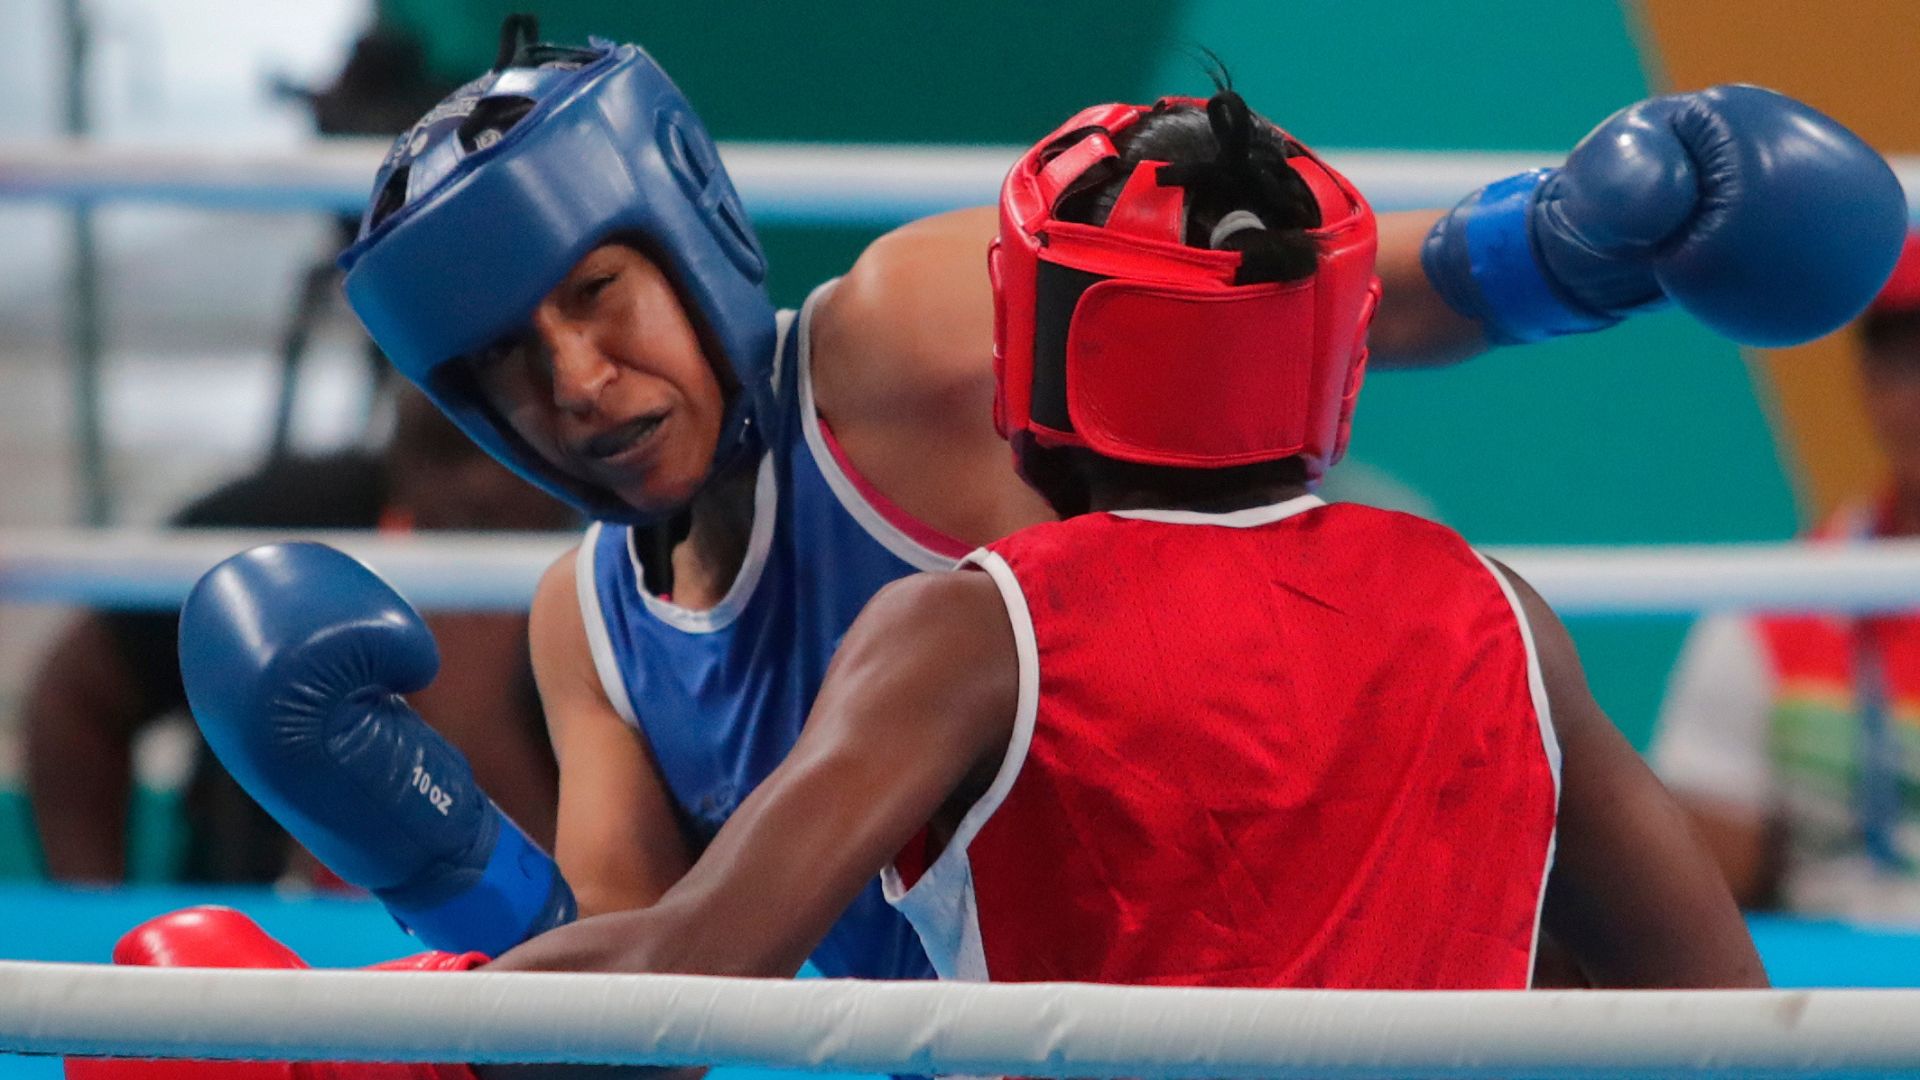 Boxing competition began with a victory by the Argentinian Lucia Pérez